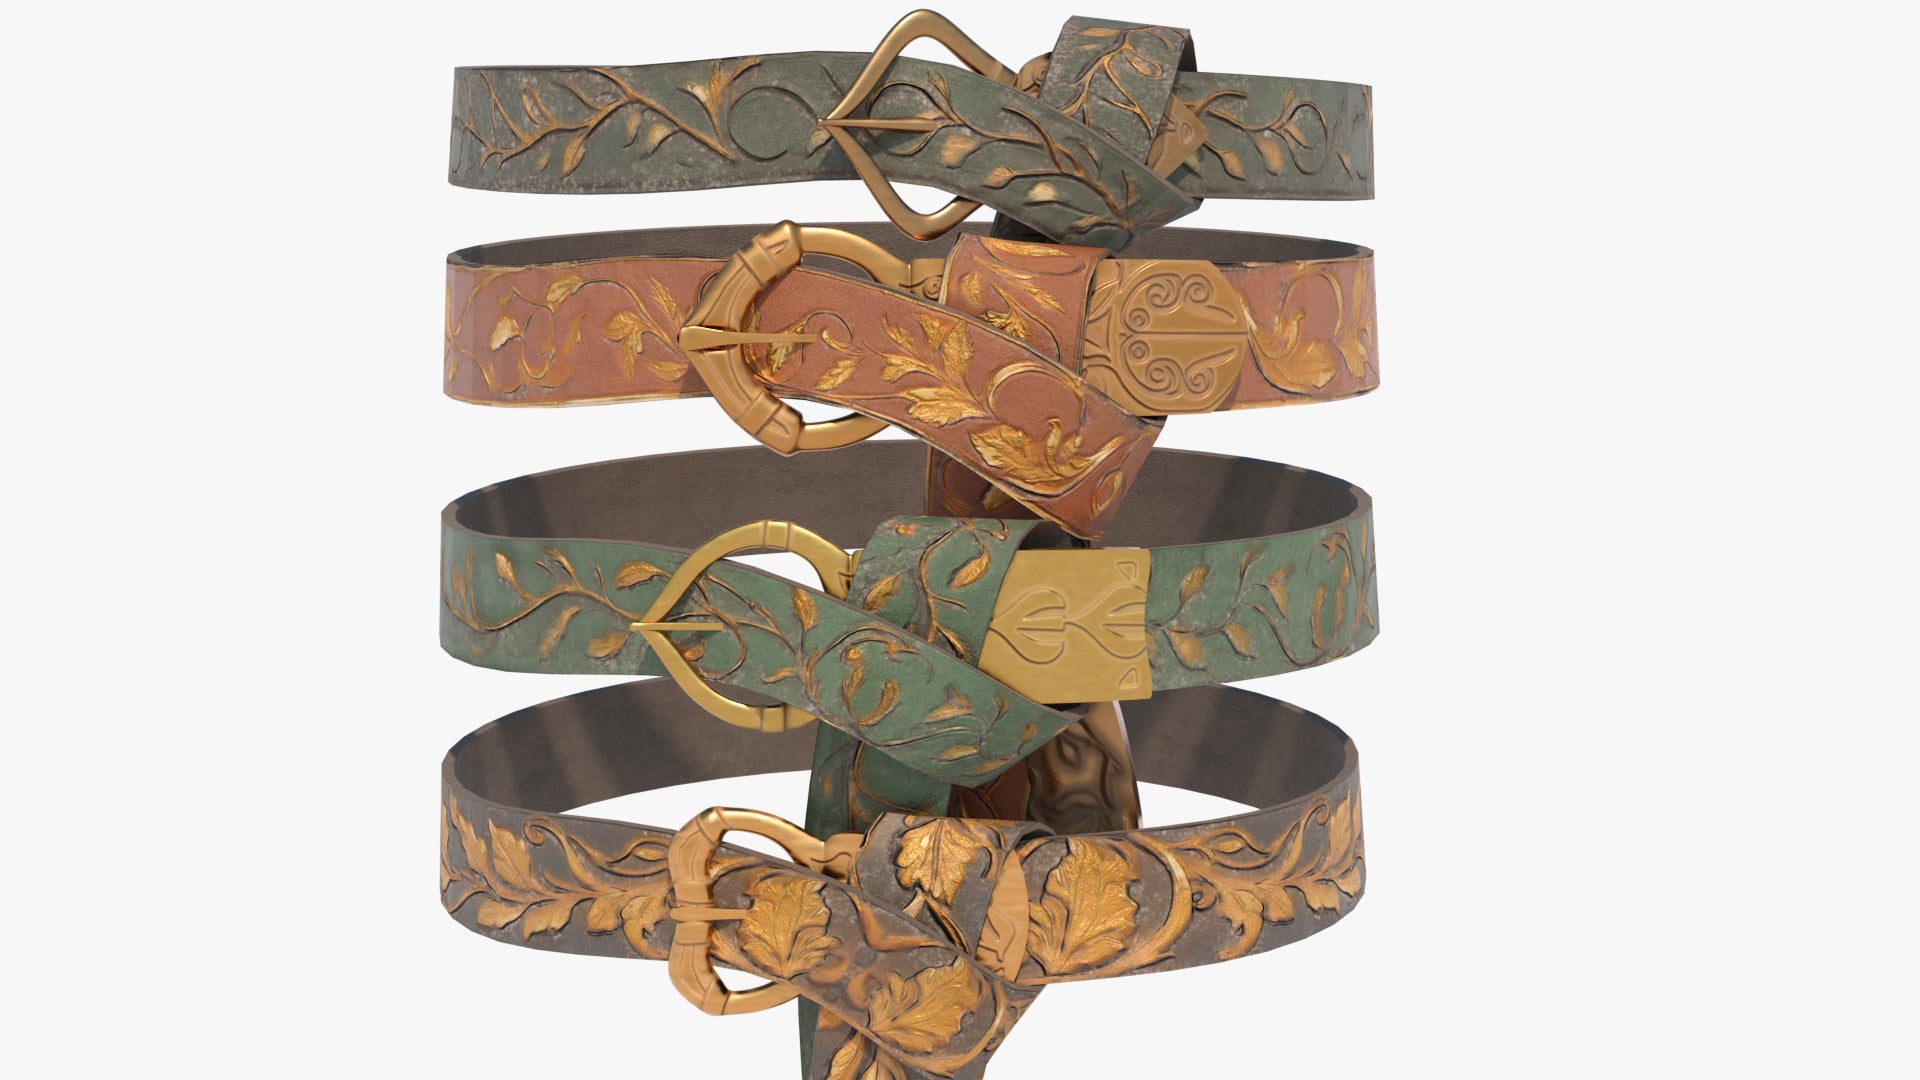 3D model of four medieval fantasy belts made of embossed leather with floral patterns, painted in gold, with elegant ancient buckles/ PBR textures and lowpoly